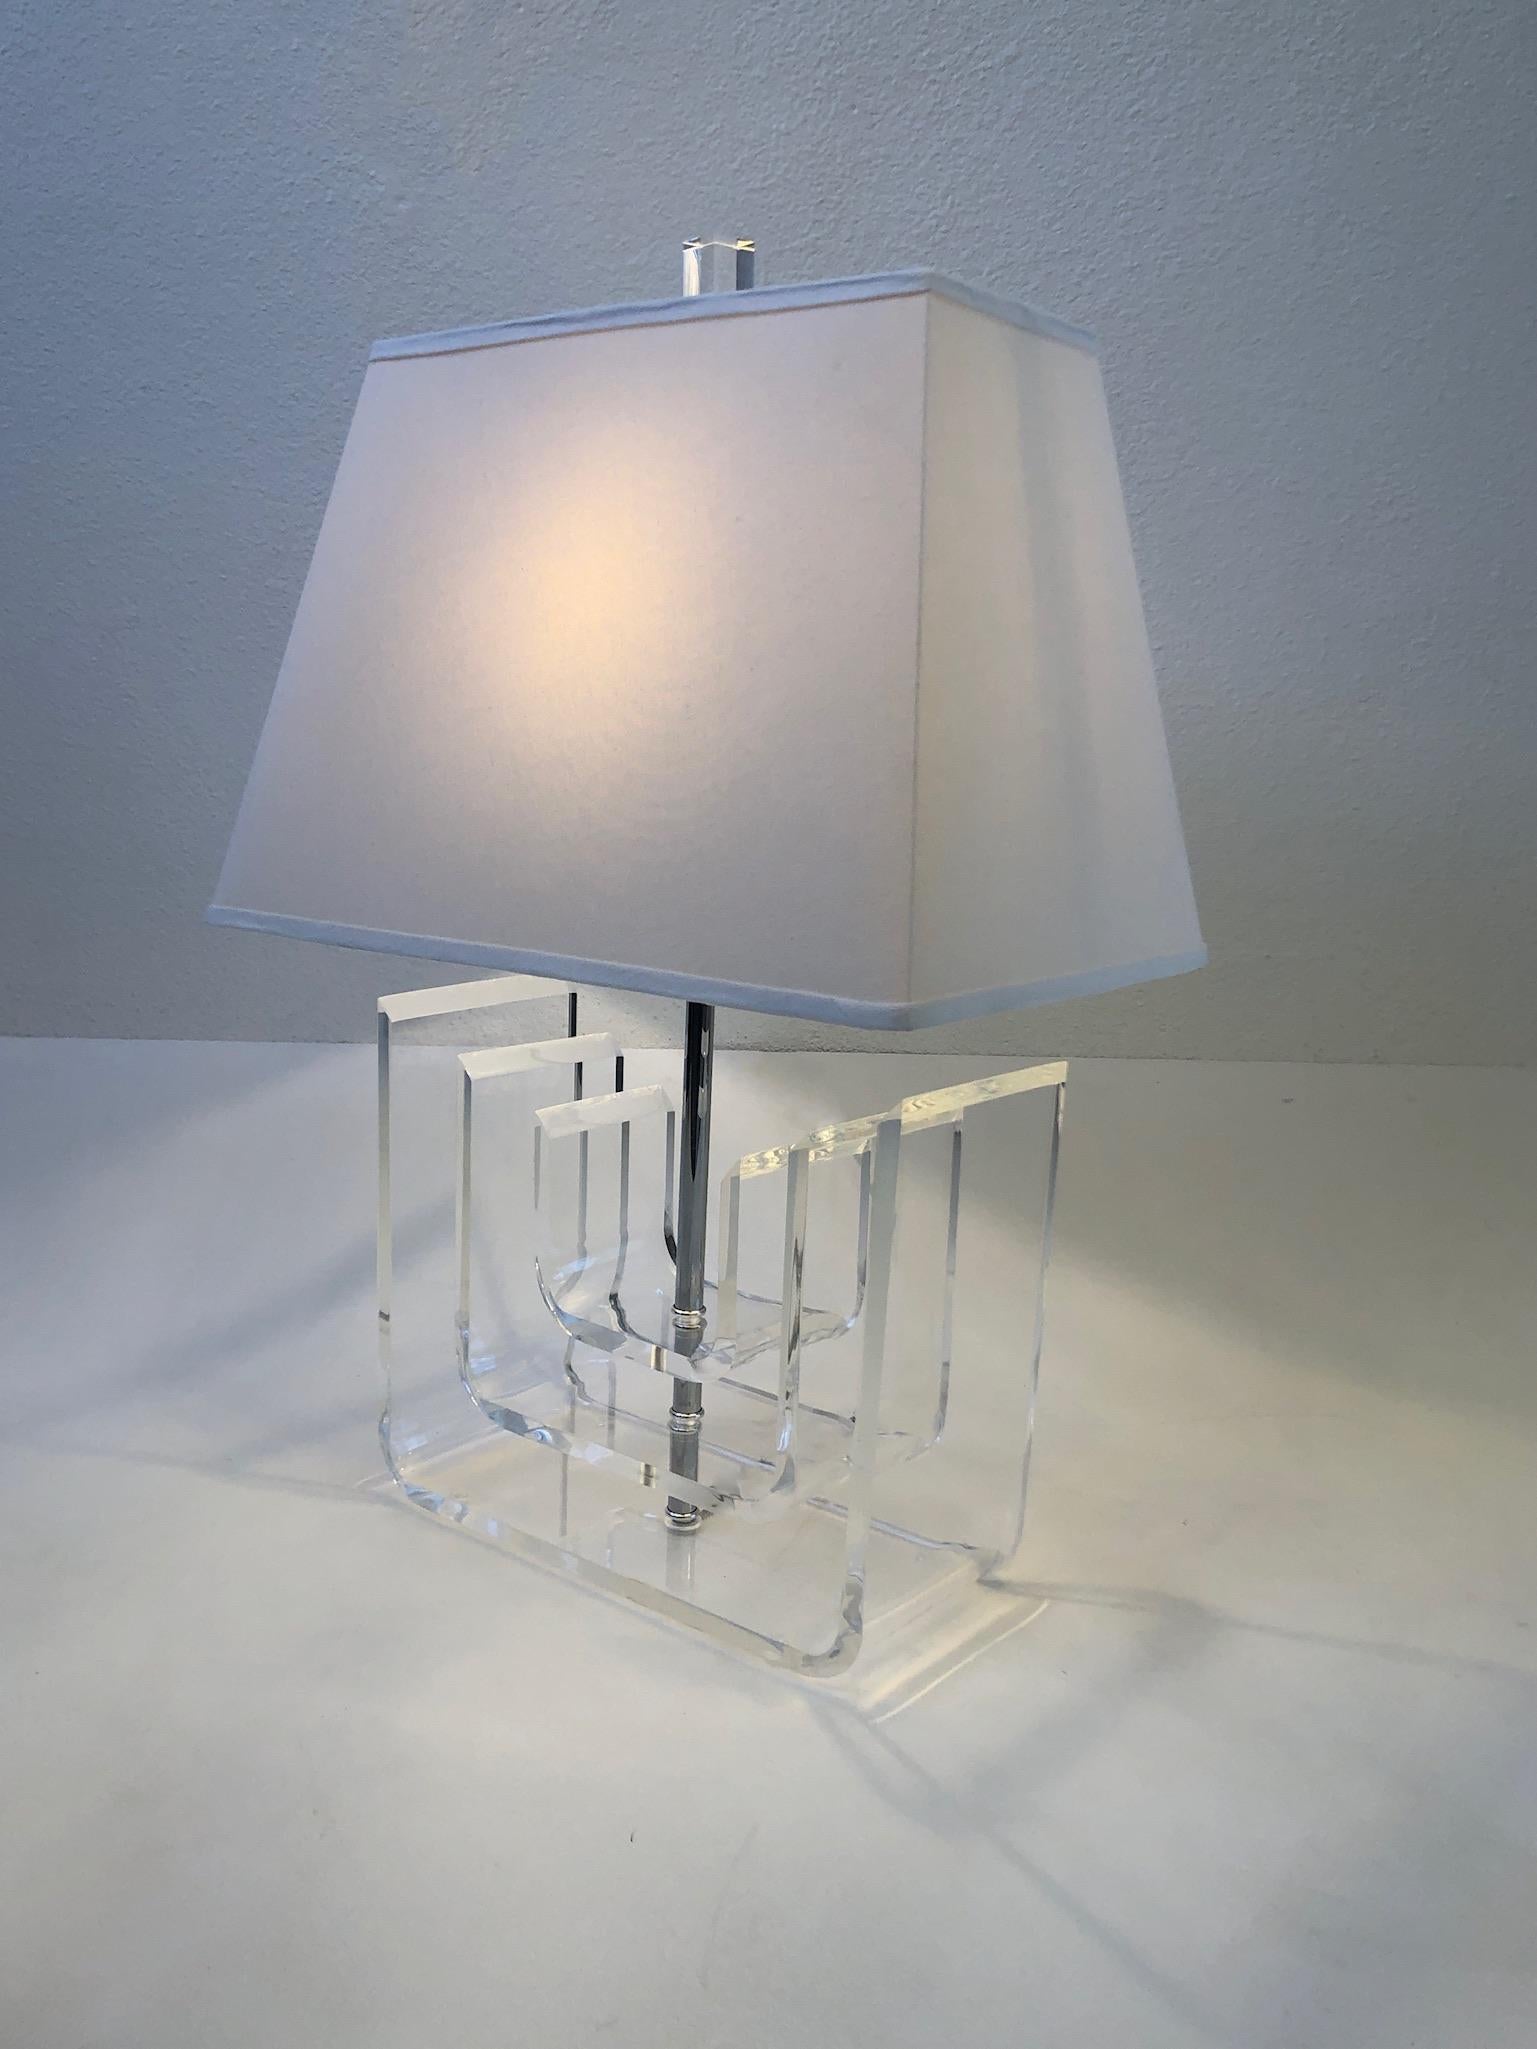 Glamorous 1970’s clear acrylic and polish chrome with a off white linen shade by Marlee.
Hand signed by Marlee.
It takes one 75w max Edison lightbulb. 
Measurements: 18” wide, 12” deep, 26” high.